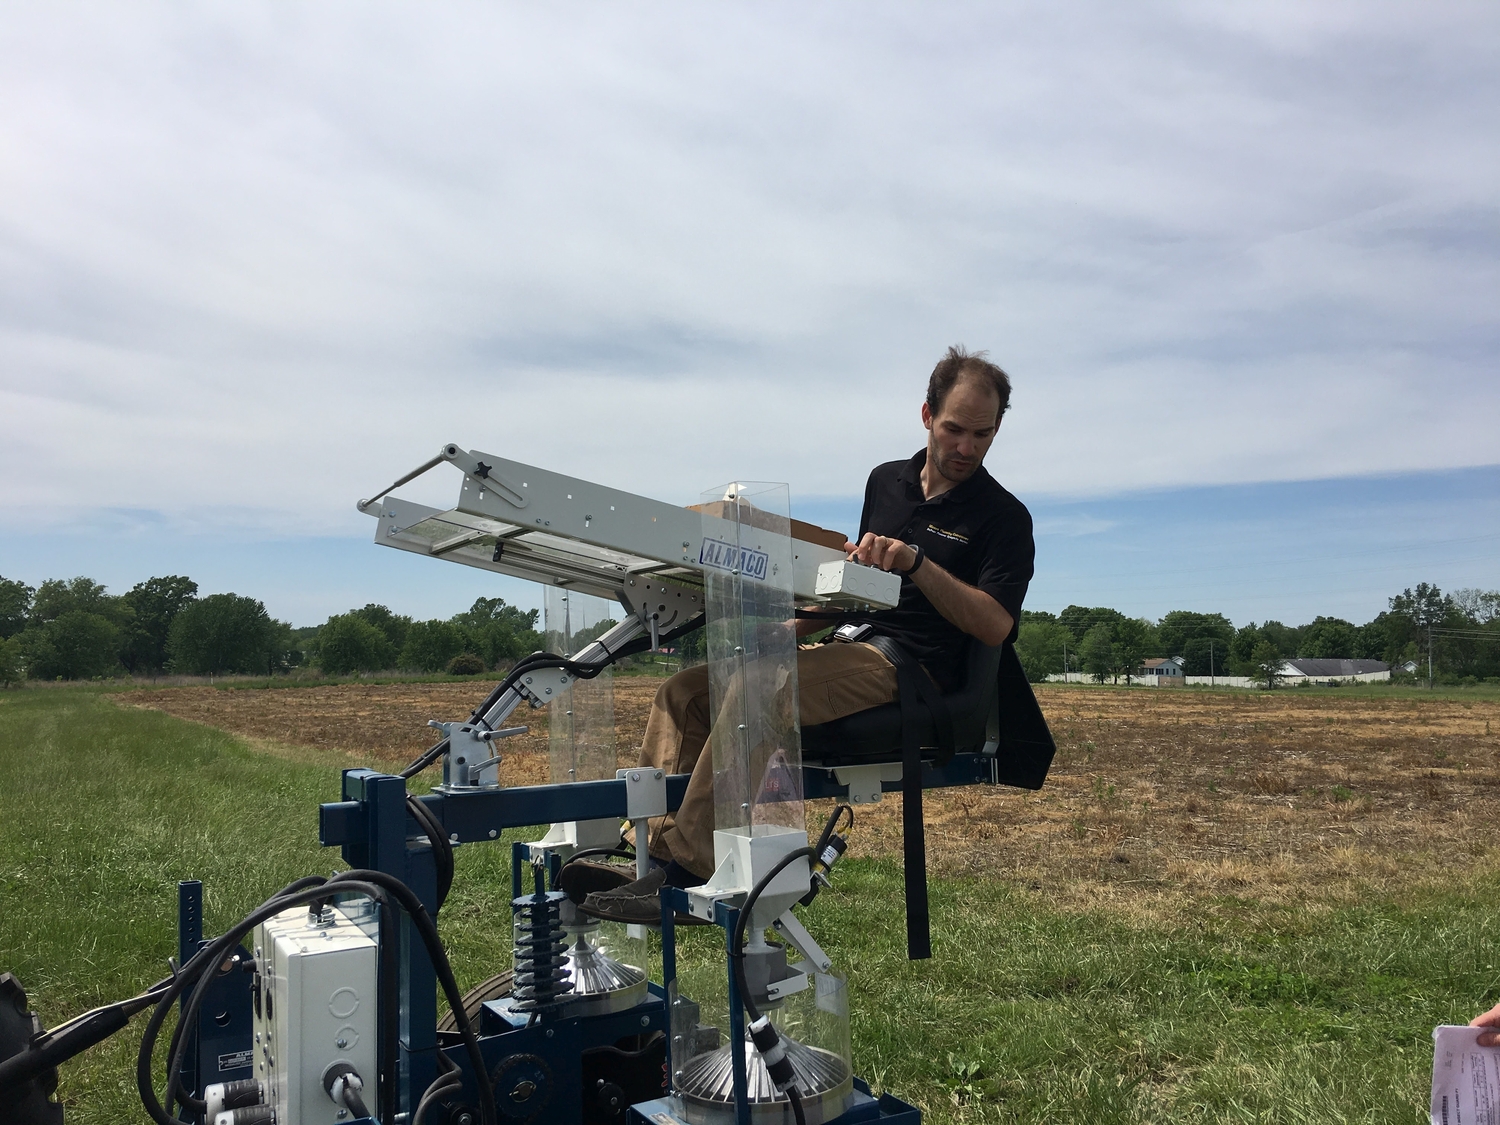 Professor Tim Beissinger on a tractor during the planting phase of the experiment